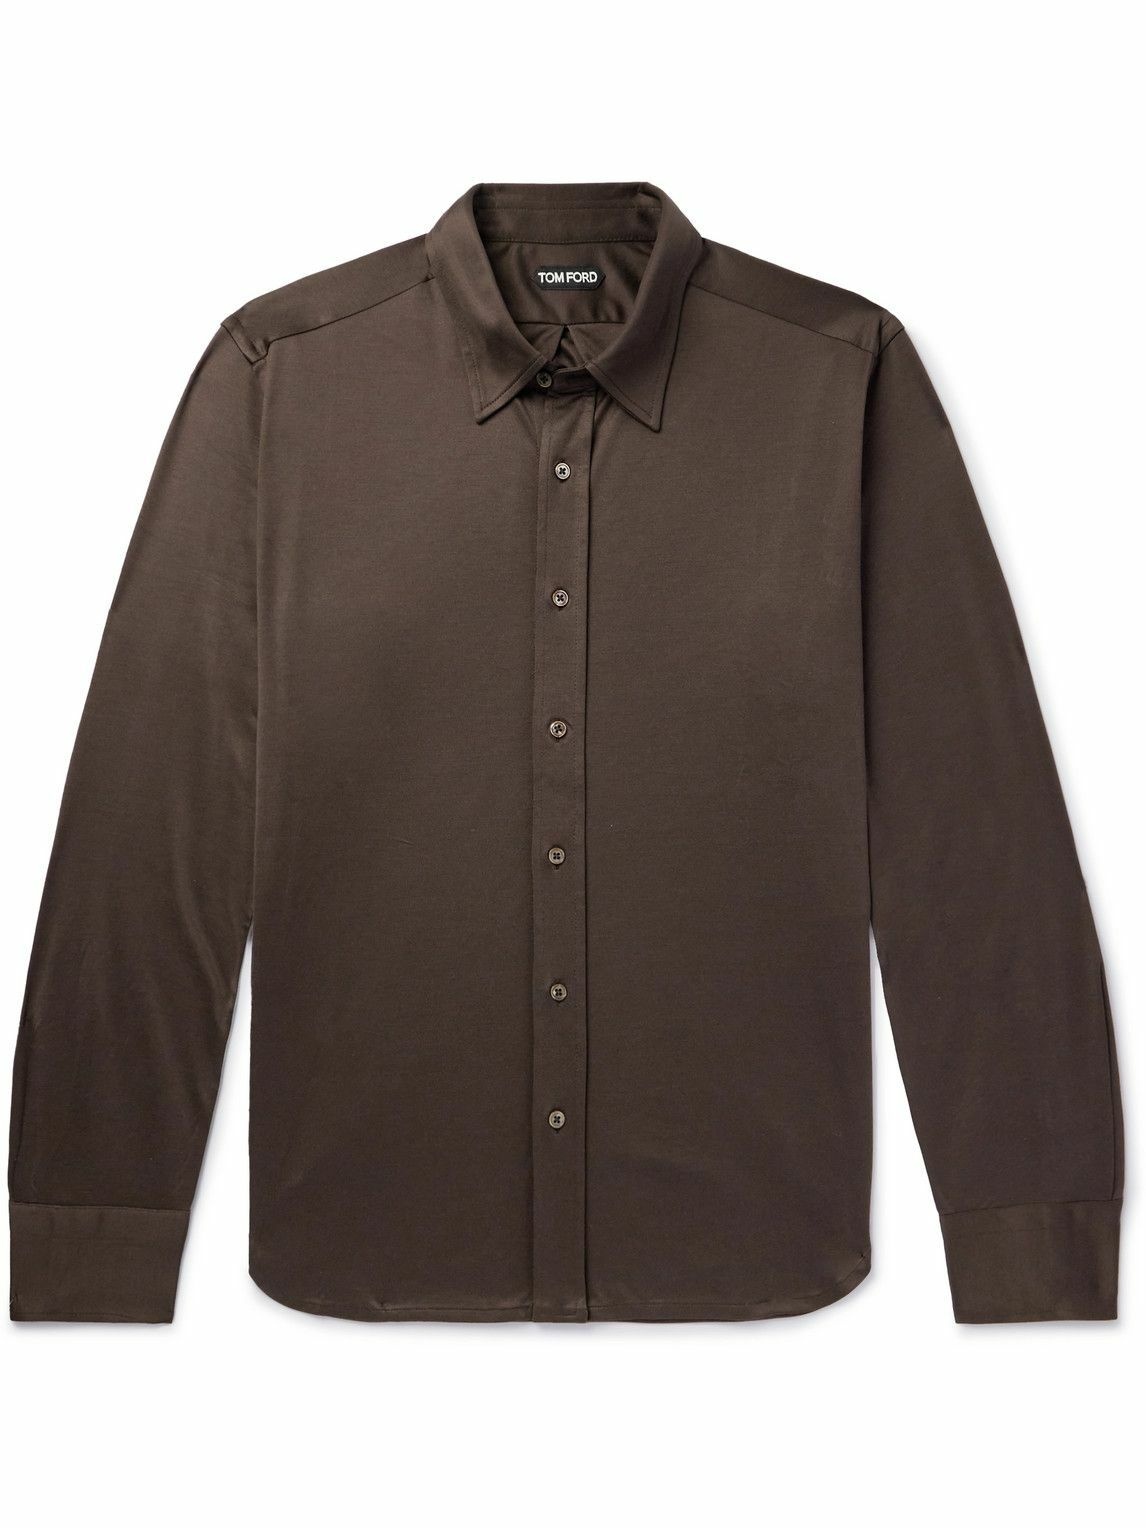 TOM FORD - Silk-Jersey Shirt - Brown TOM FORD